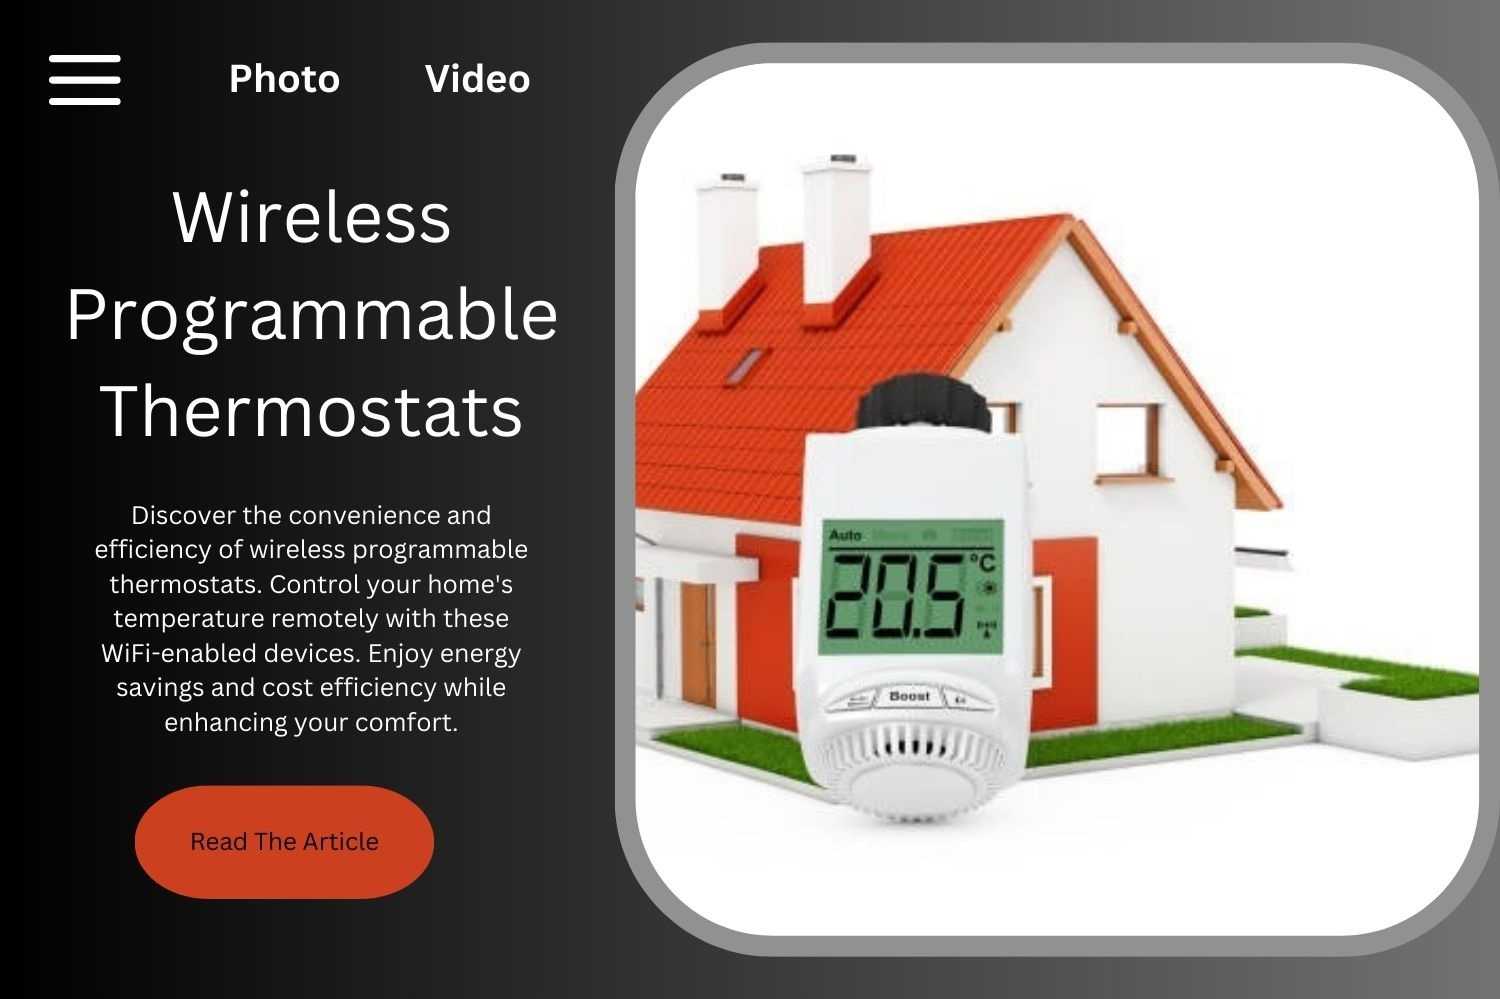 Take Control of Your House Temperature with Wireless Programmable Thermostats